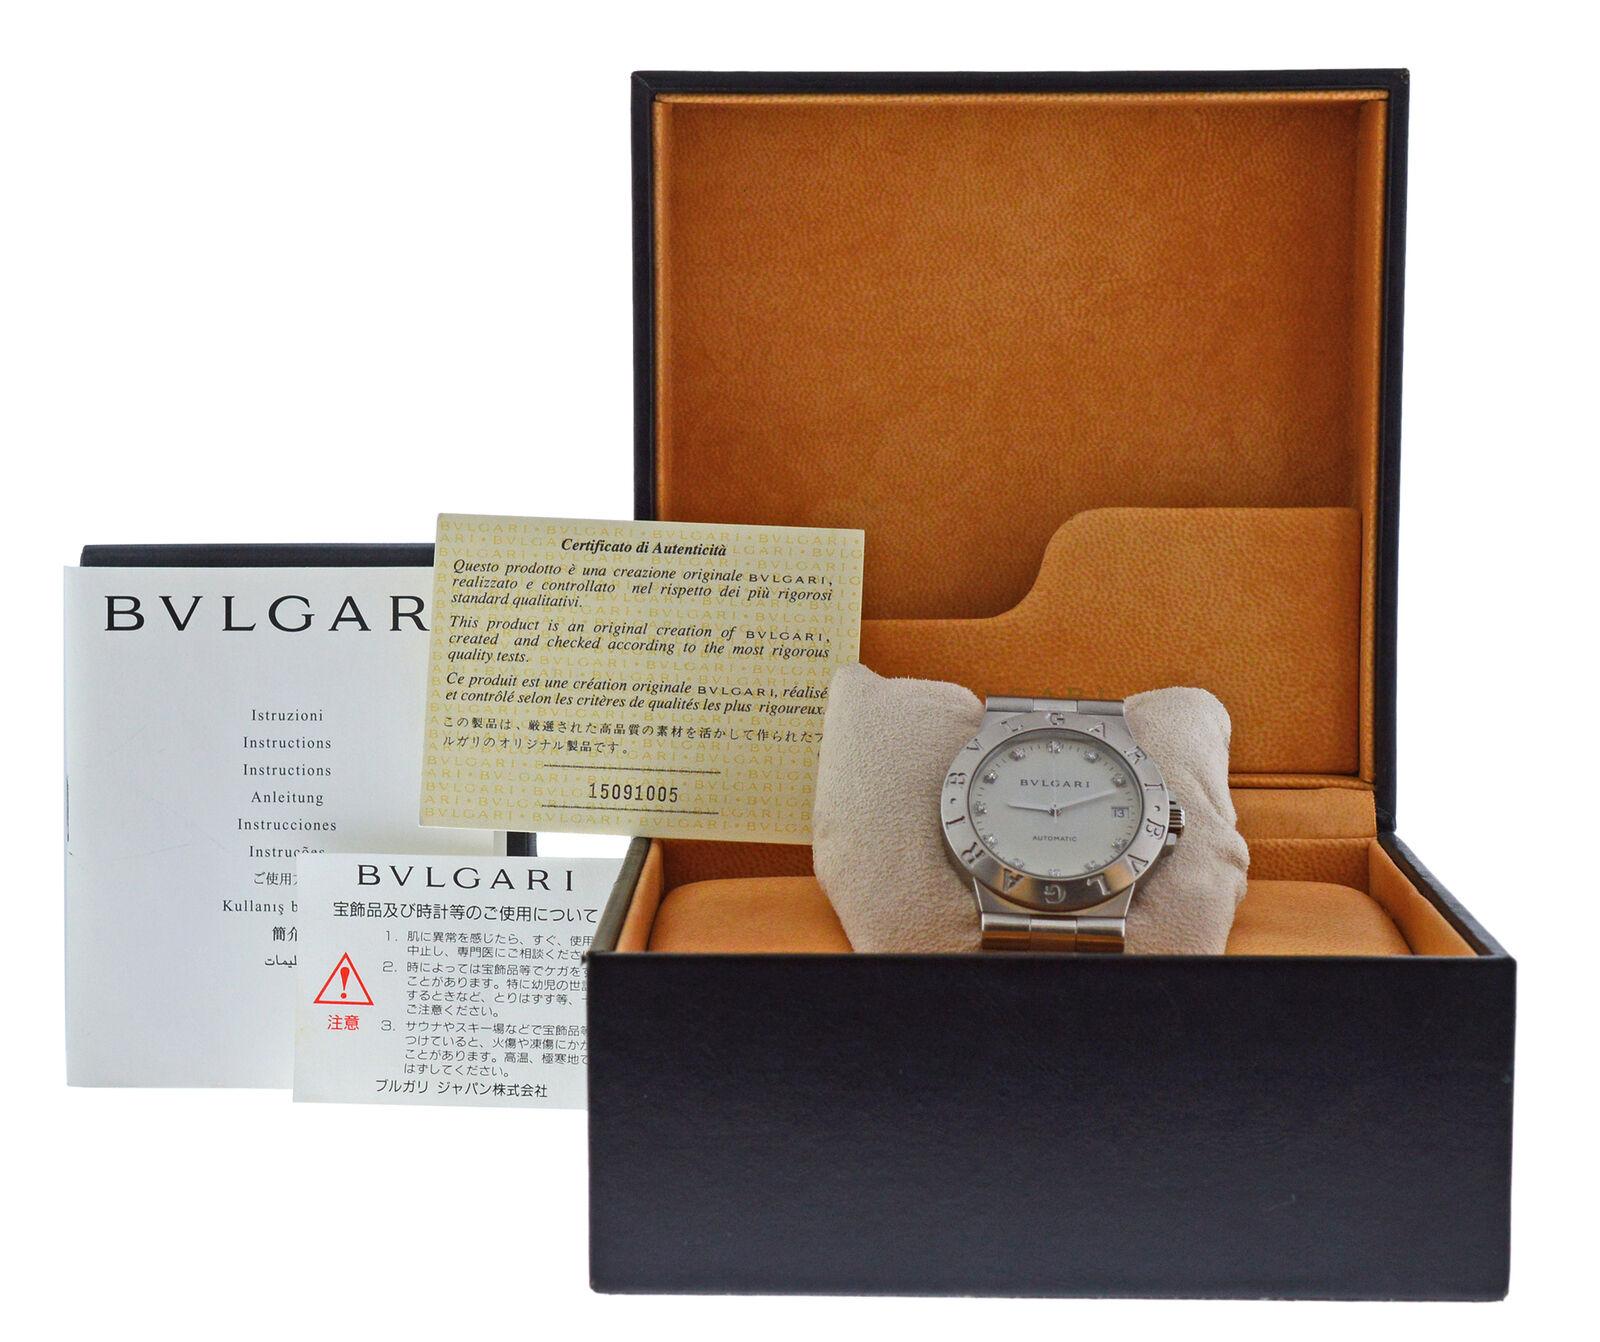 Brand	Bvlgari
Model	Diagono LCV35S 
Gender	Men
Condition	Pre-owned
Movement	Swiss Automatic
Case Material	Stainless Steel
Bracelet / Strap Material	
Stainless Steel

Clasp / Buckle Material	
Stainless Steel 

Clasp Type	Deployment
Bracelet / Strap